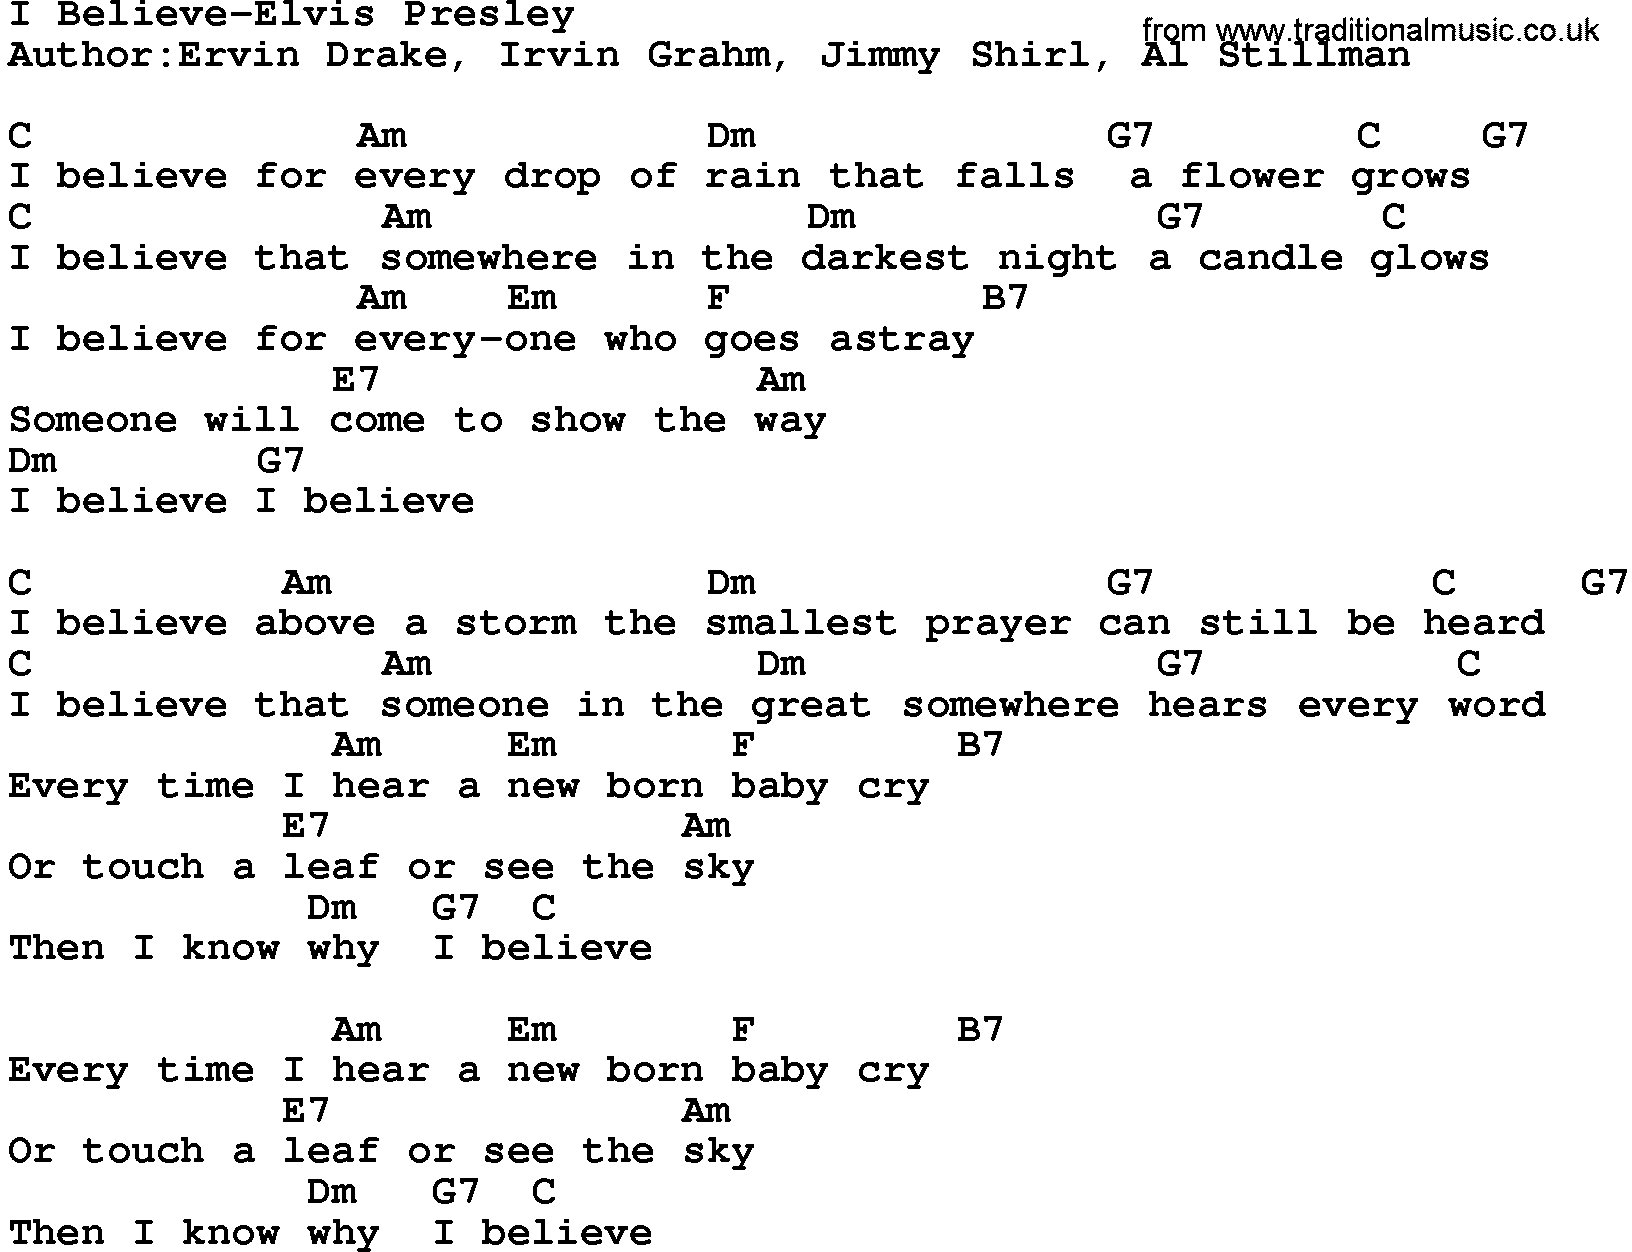 Country music song: I Believe-Elvis Presley lyrics and chords